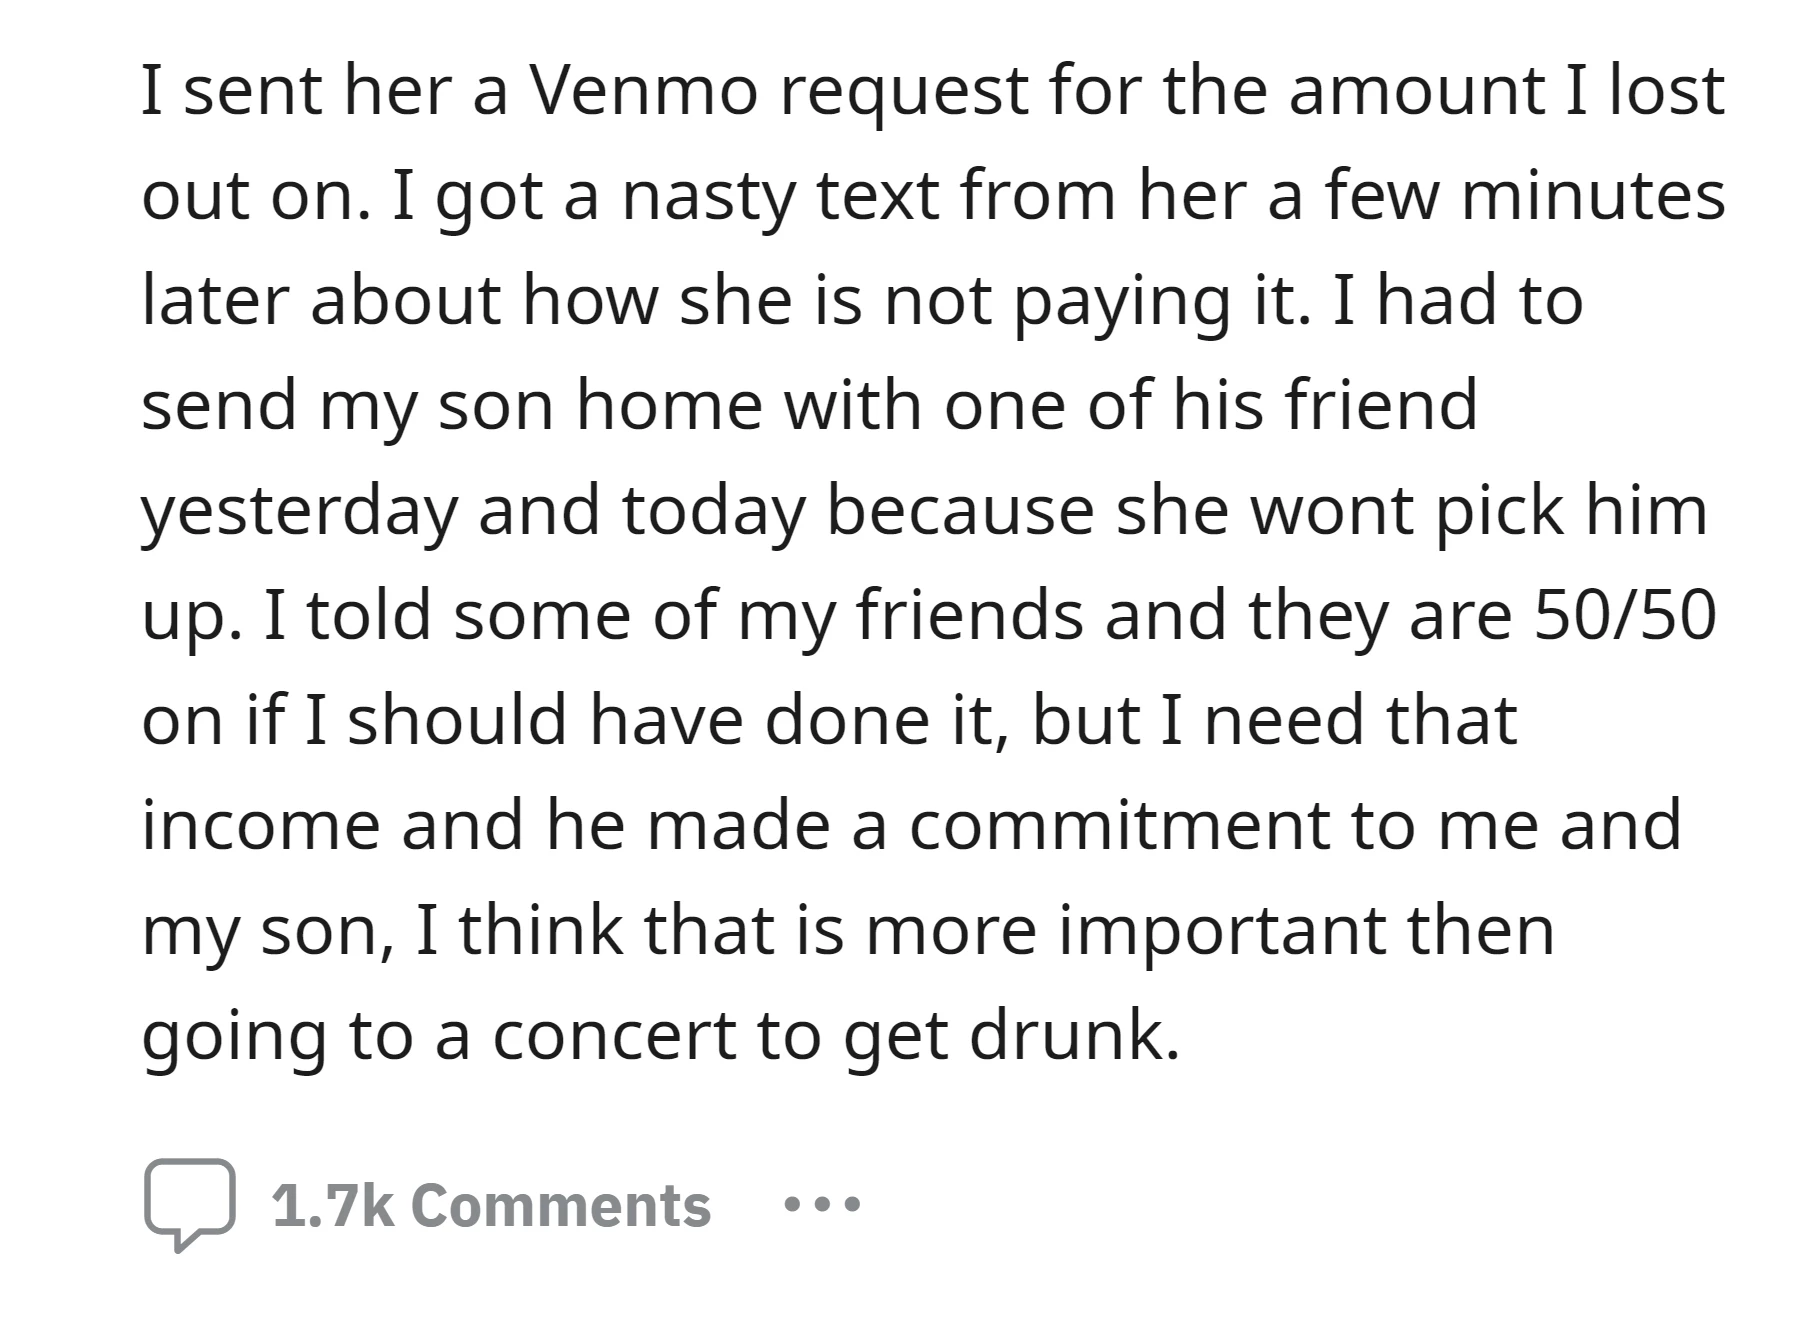 OP sent her SIL a Venmo request for the lost income, but she refused to pay